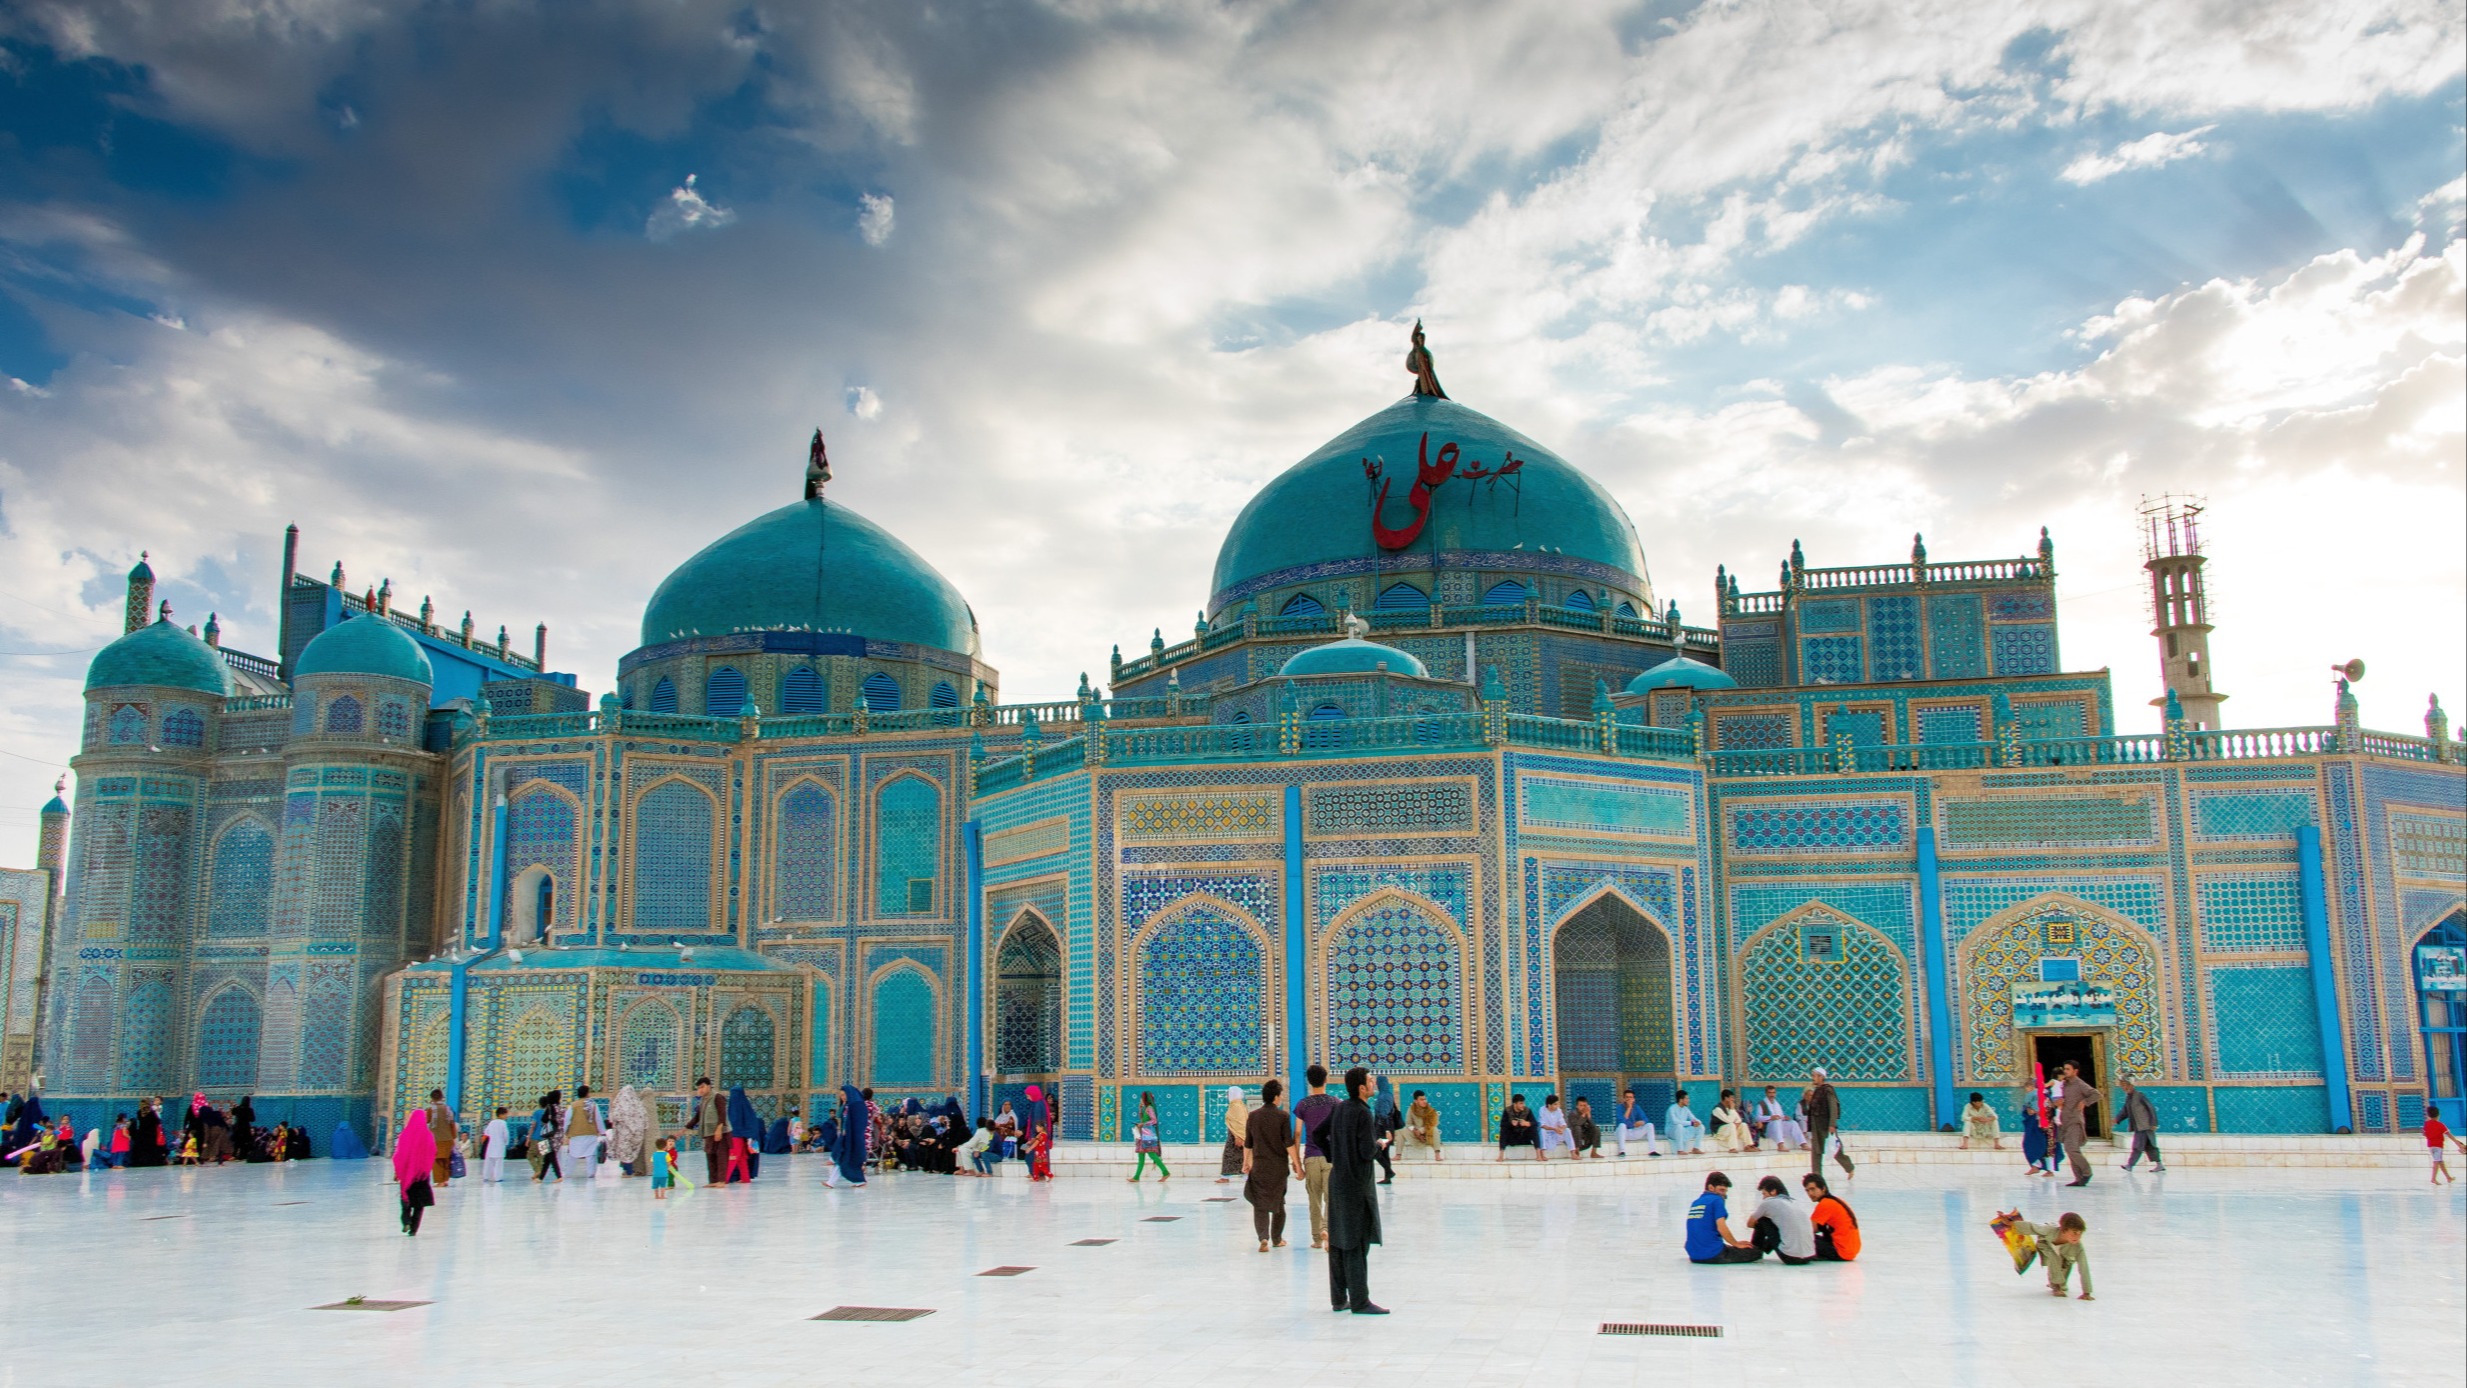 Afghanistan Could Be Come a Hub of Tourism in Asia - Tourists